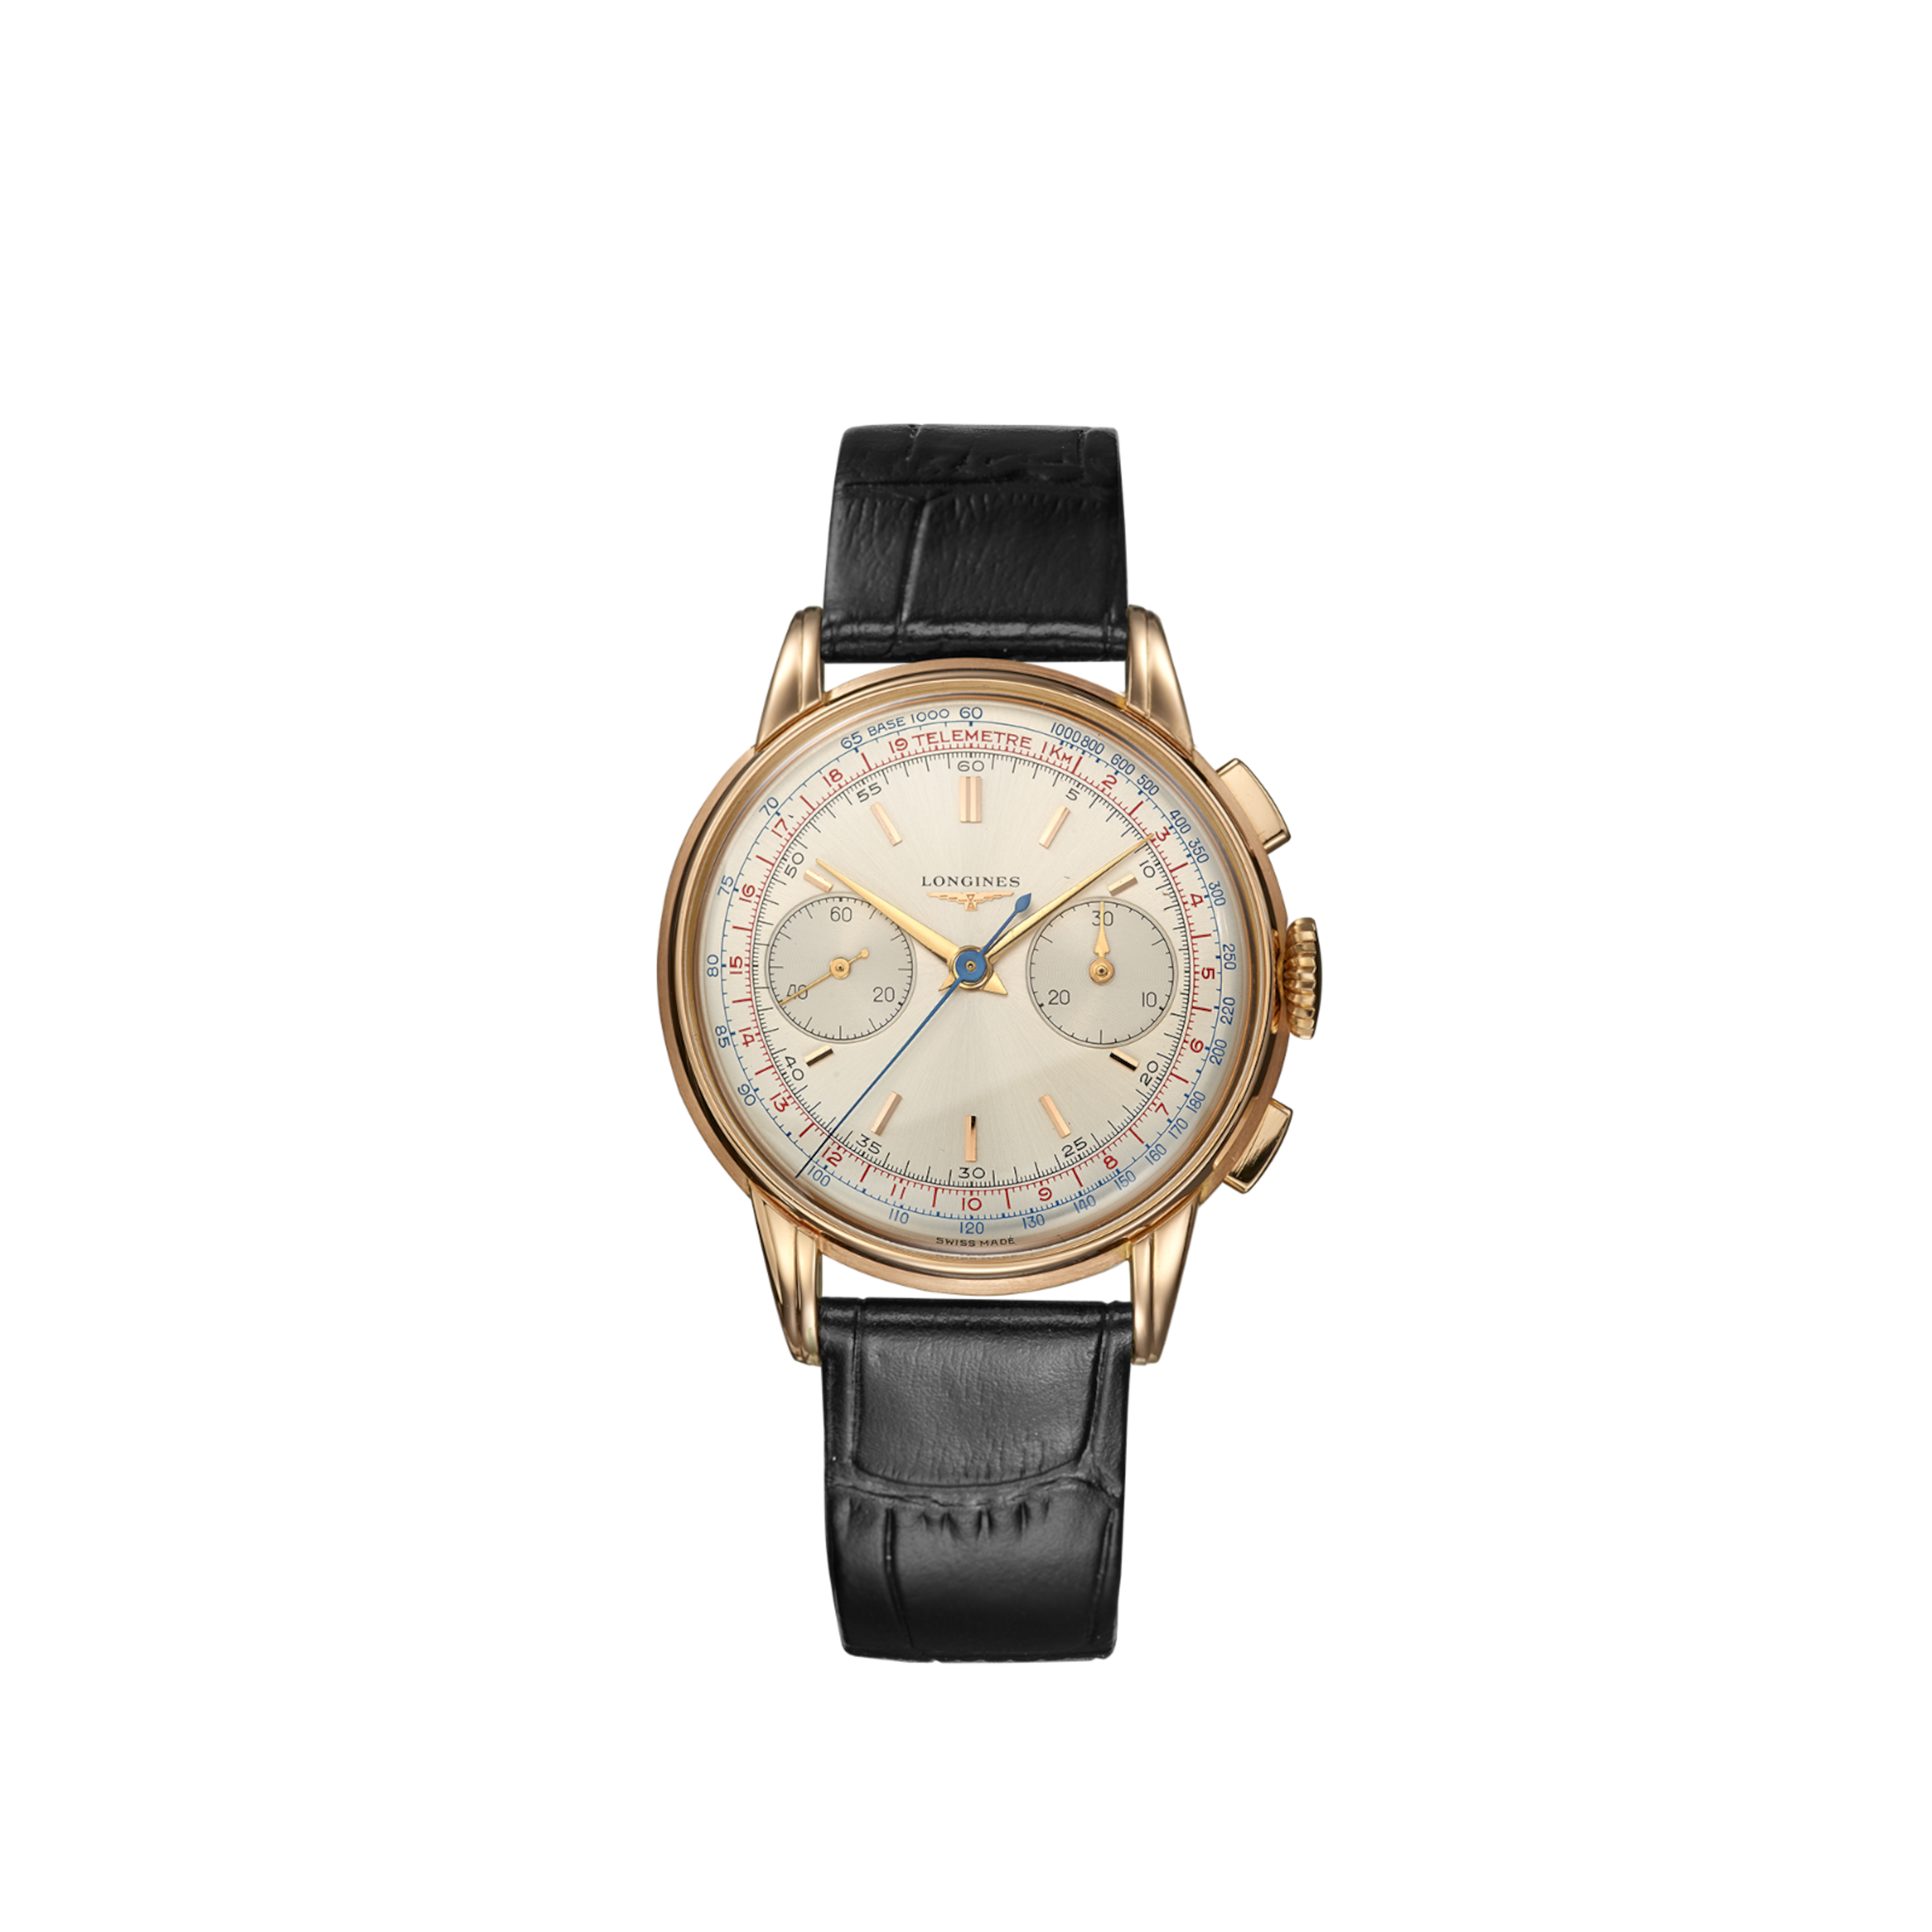 Longines Chronograph 30CH in 18ct rose gold (1951)